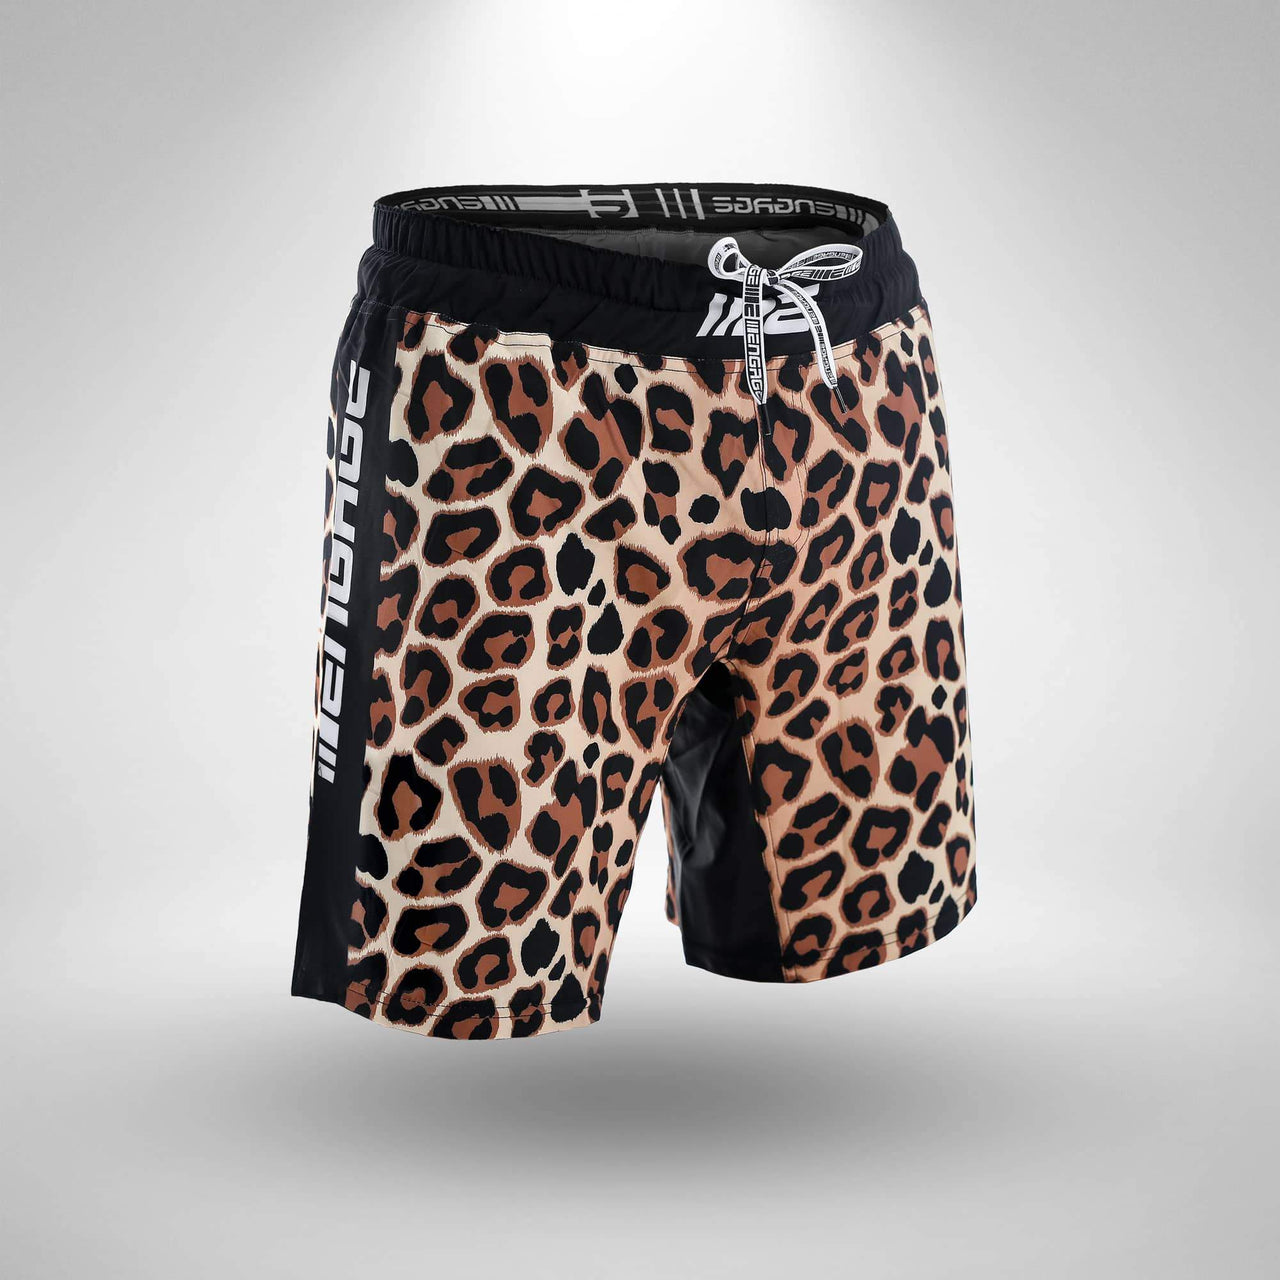 ENGAGE / LEOPARD MMA GRAPPLING SHORTS - ファイトショーツ